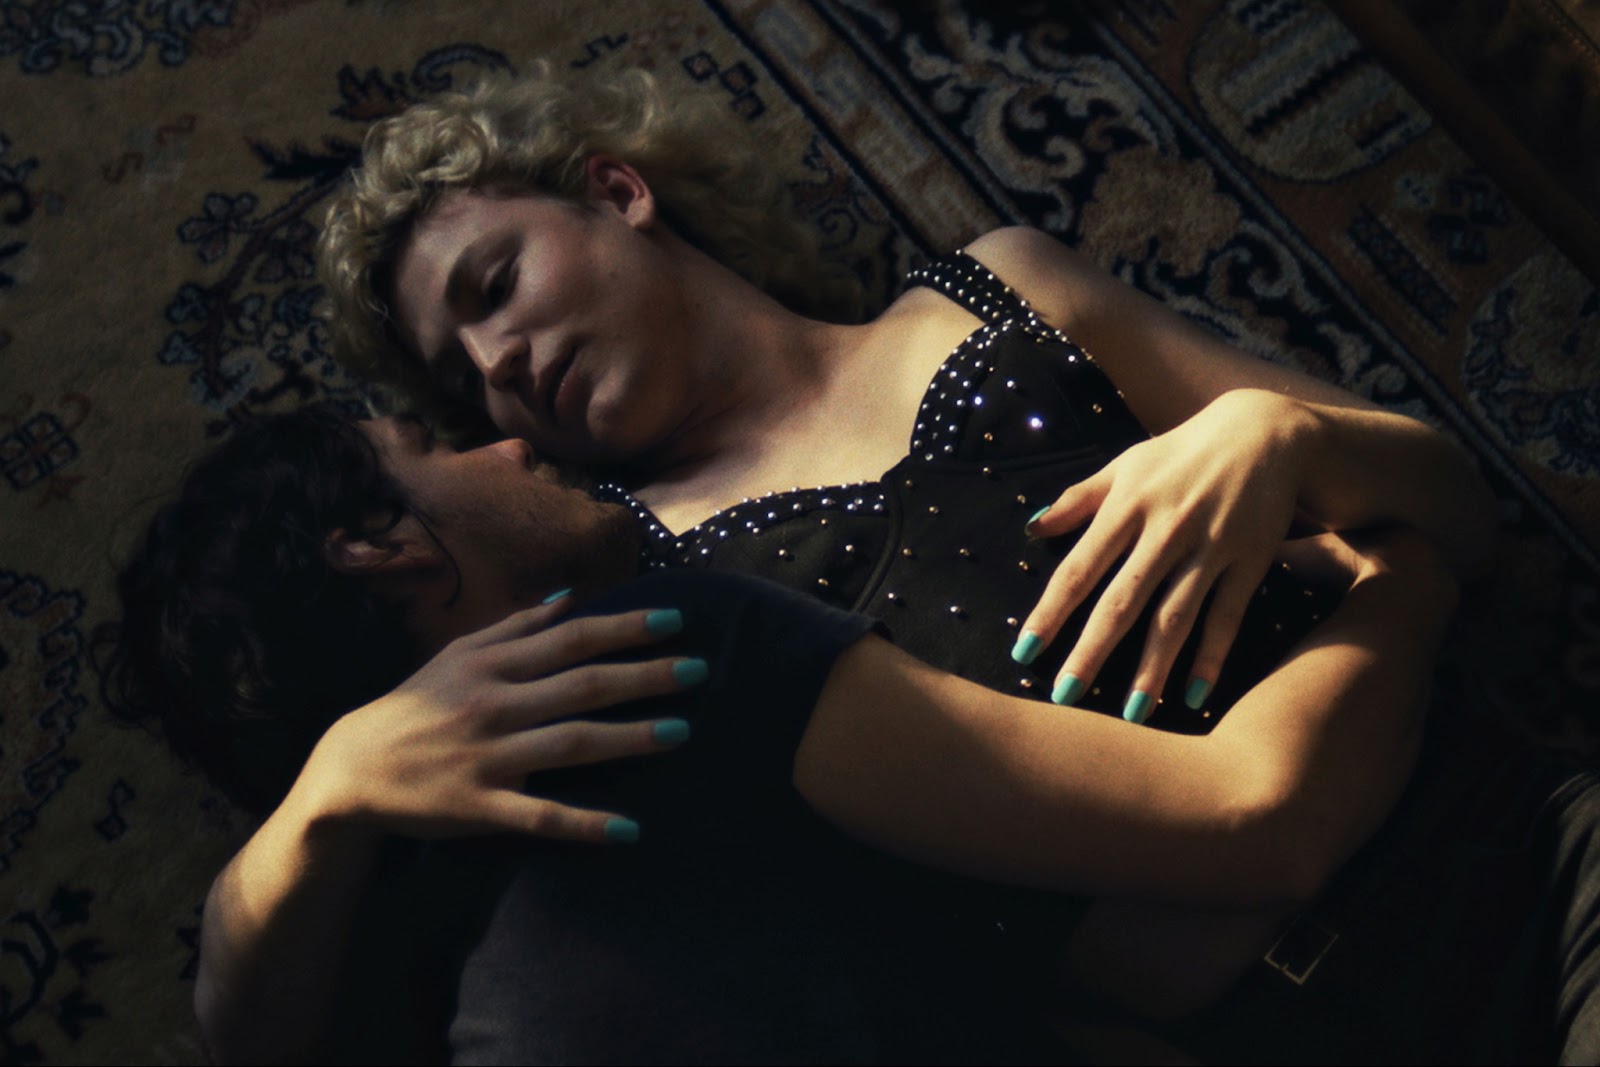 From the film Till the End of the Night, two people lay on a ornate rug on the floor, holding on another closely and looking into each other's eyes.